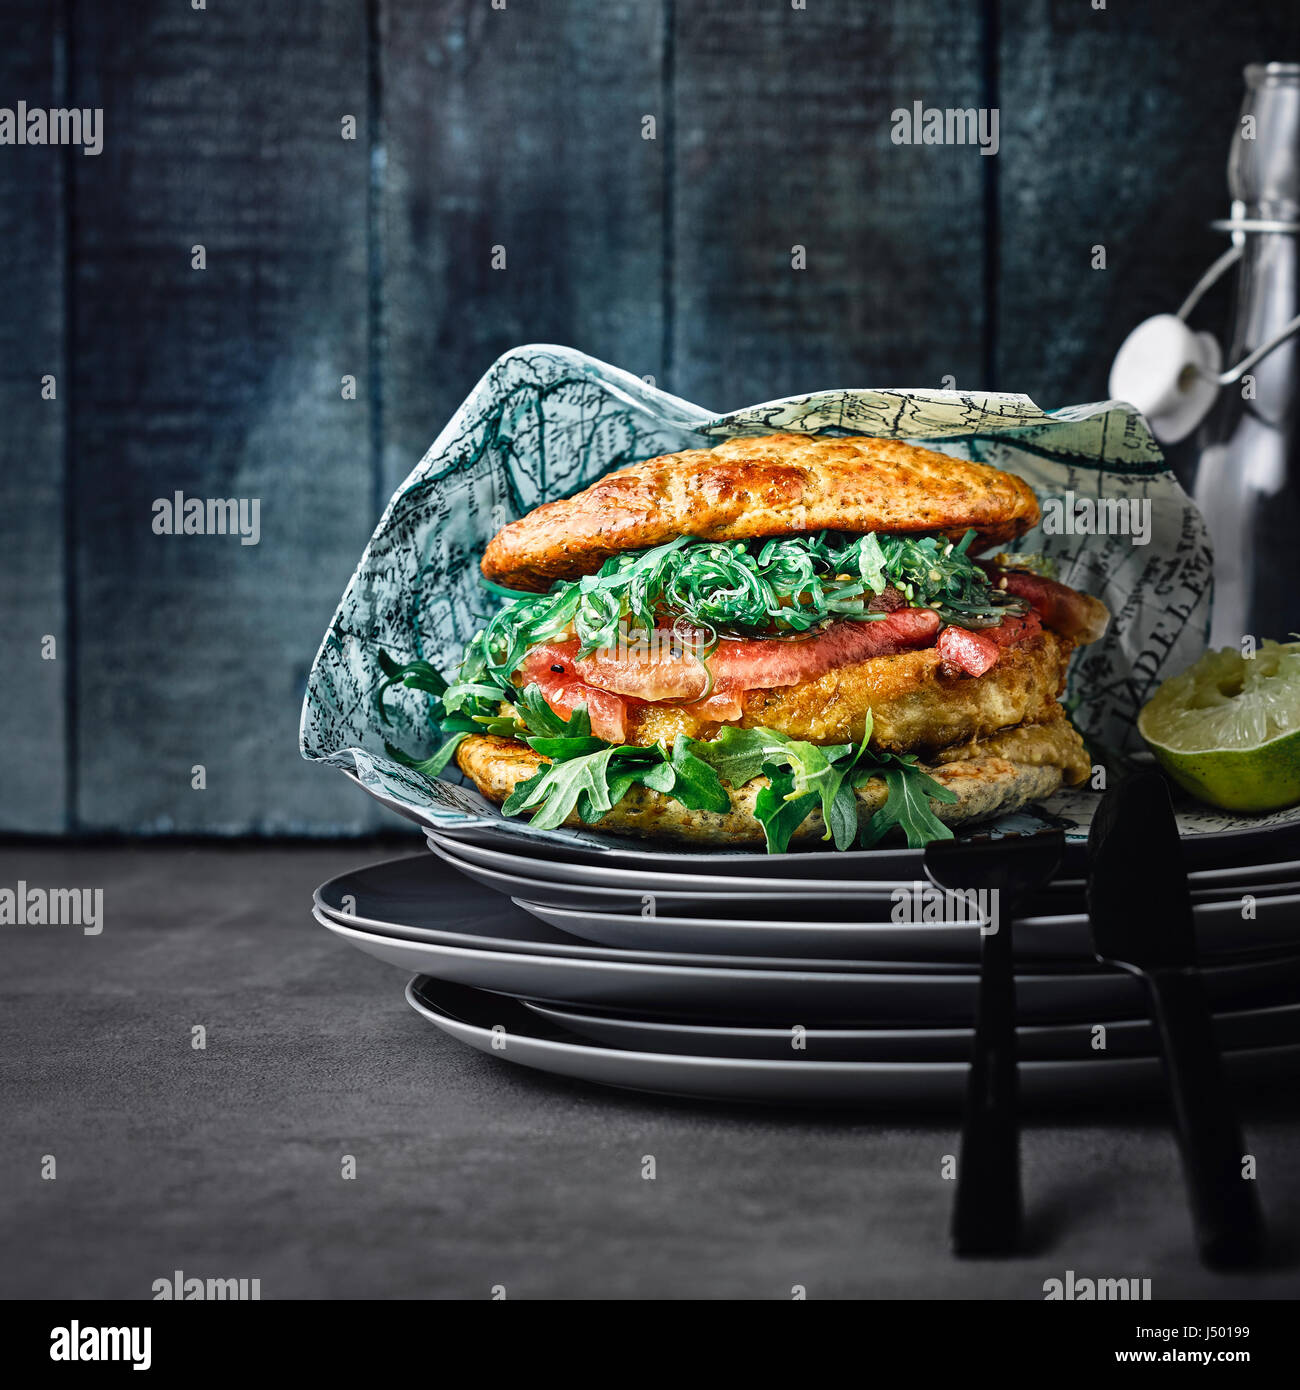 Fish burger with watermelon and wakame salad Stock Photo